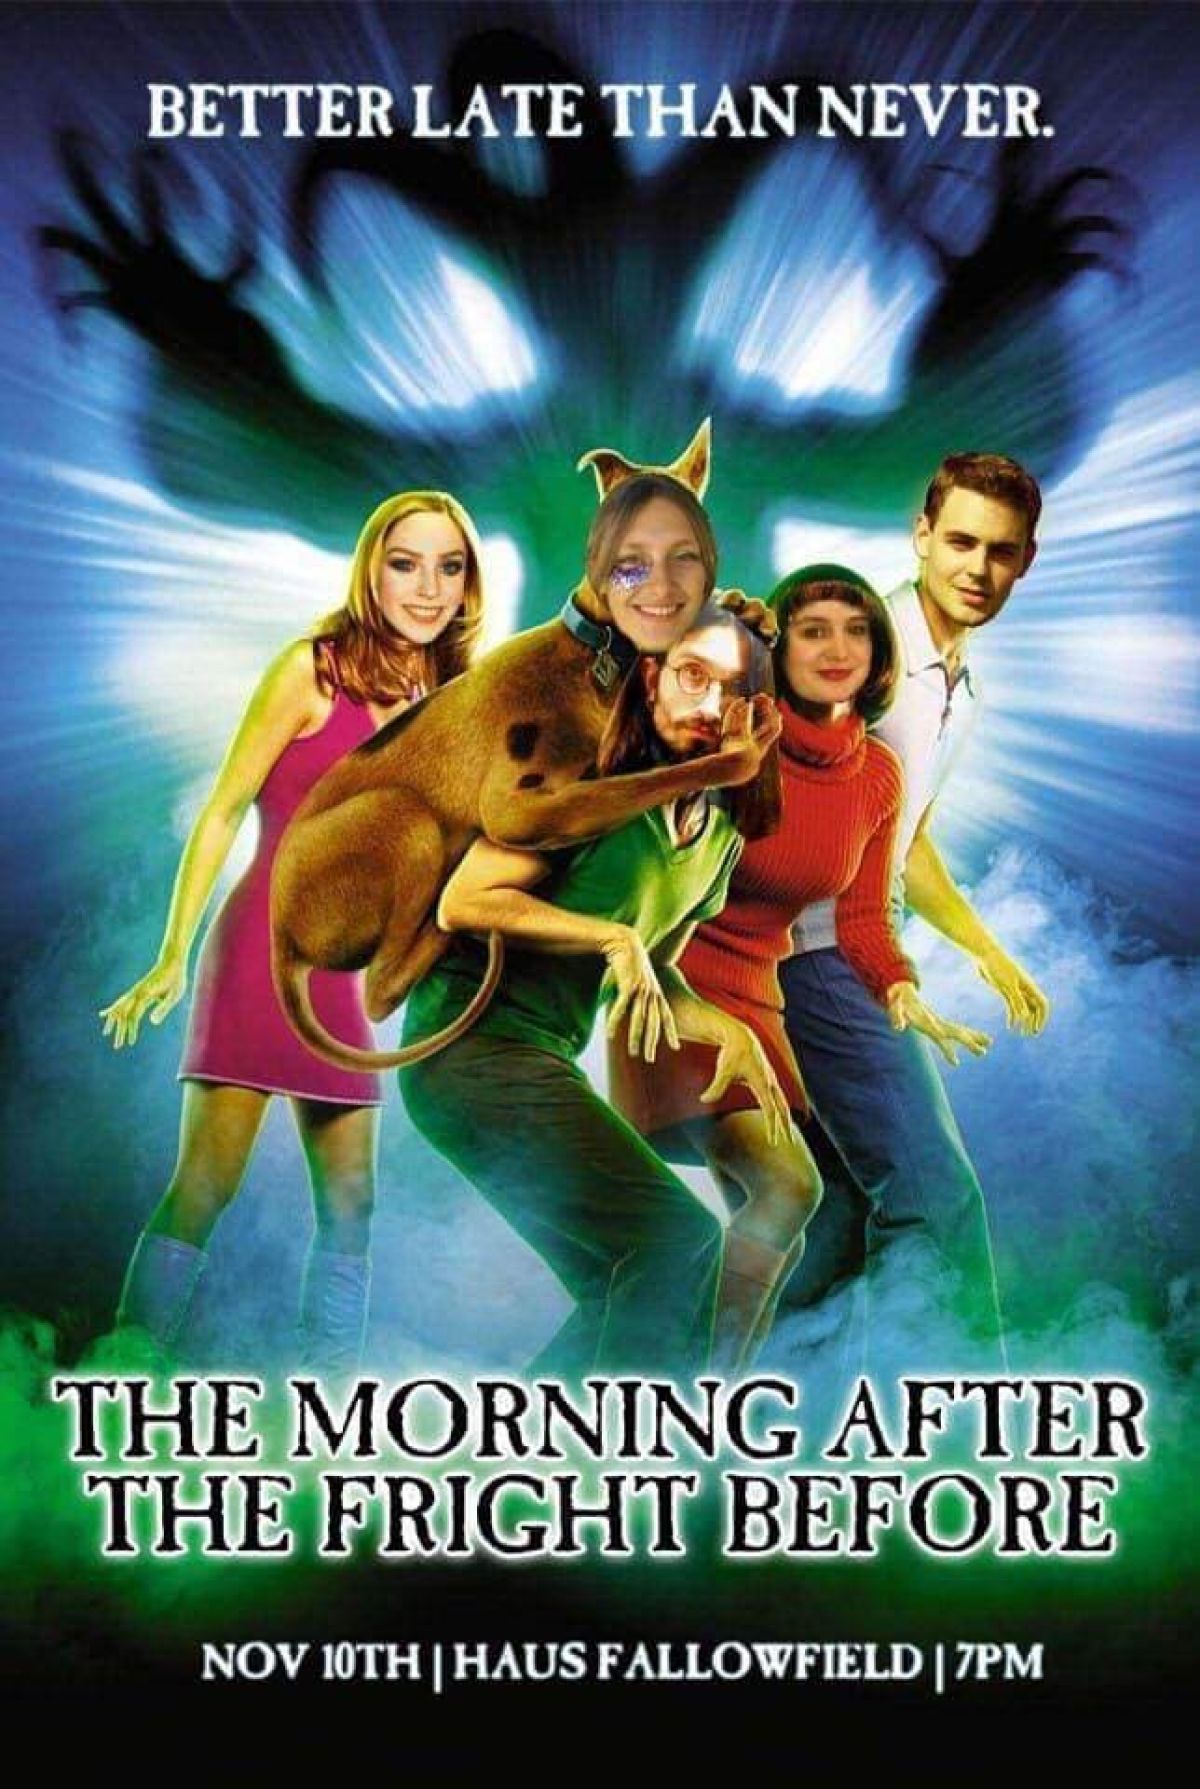 Review: The Morning After the Fright Before